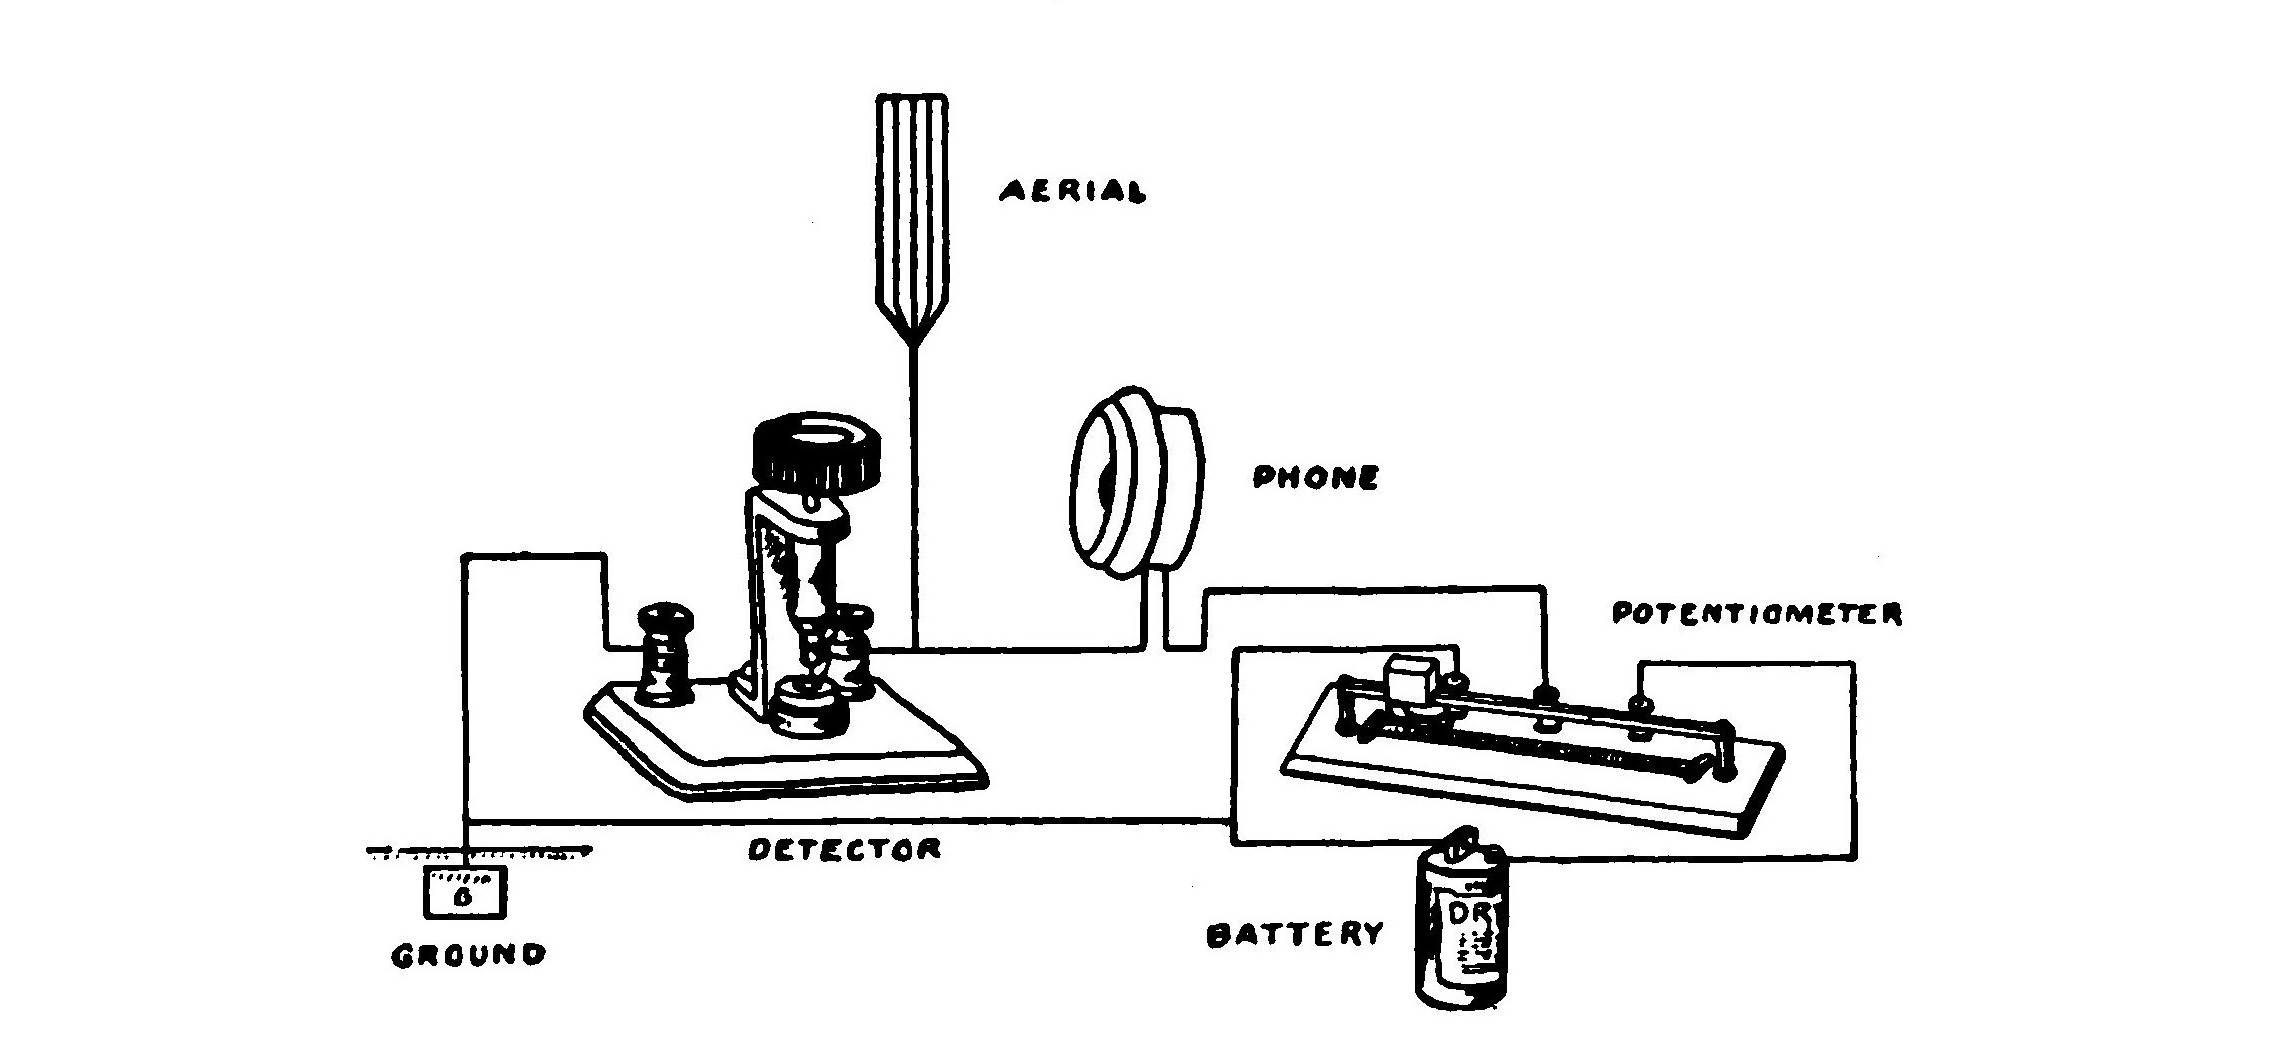 FIG. 75.—Diagram showing how potentiometer is connected in circuit.